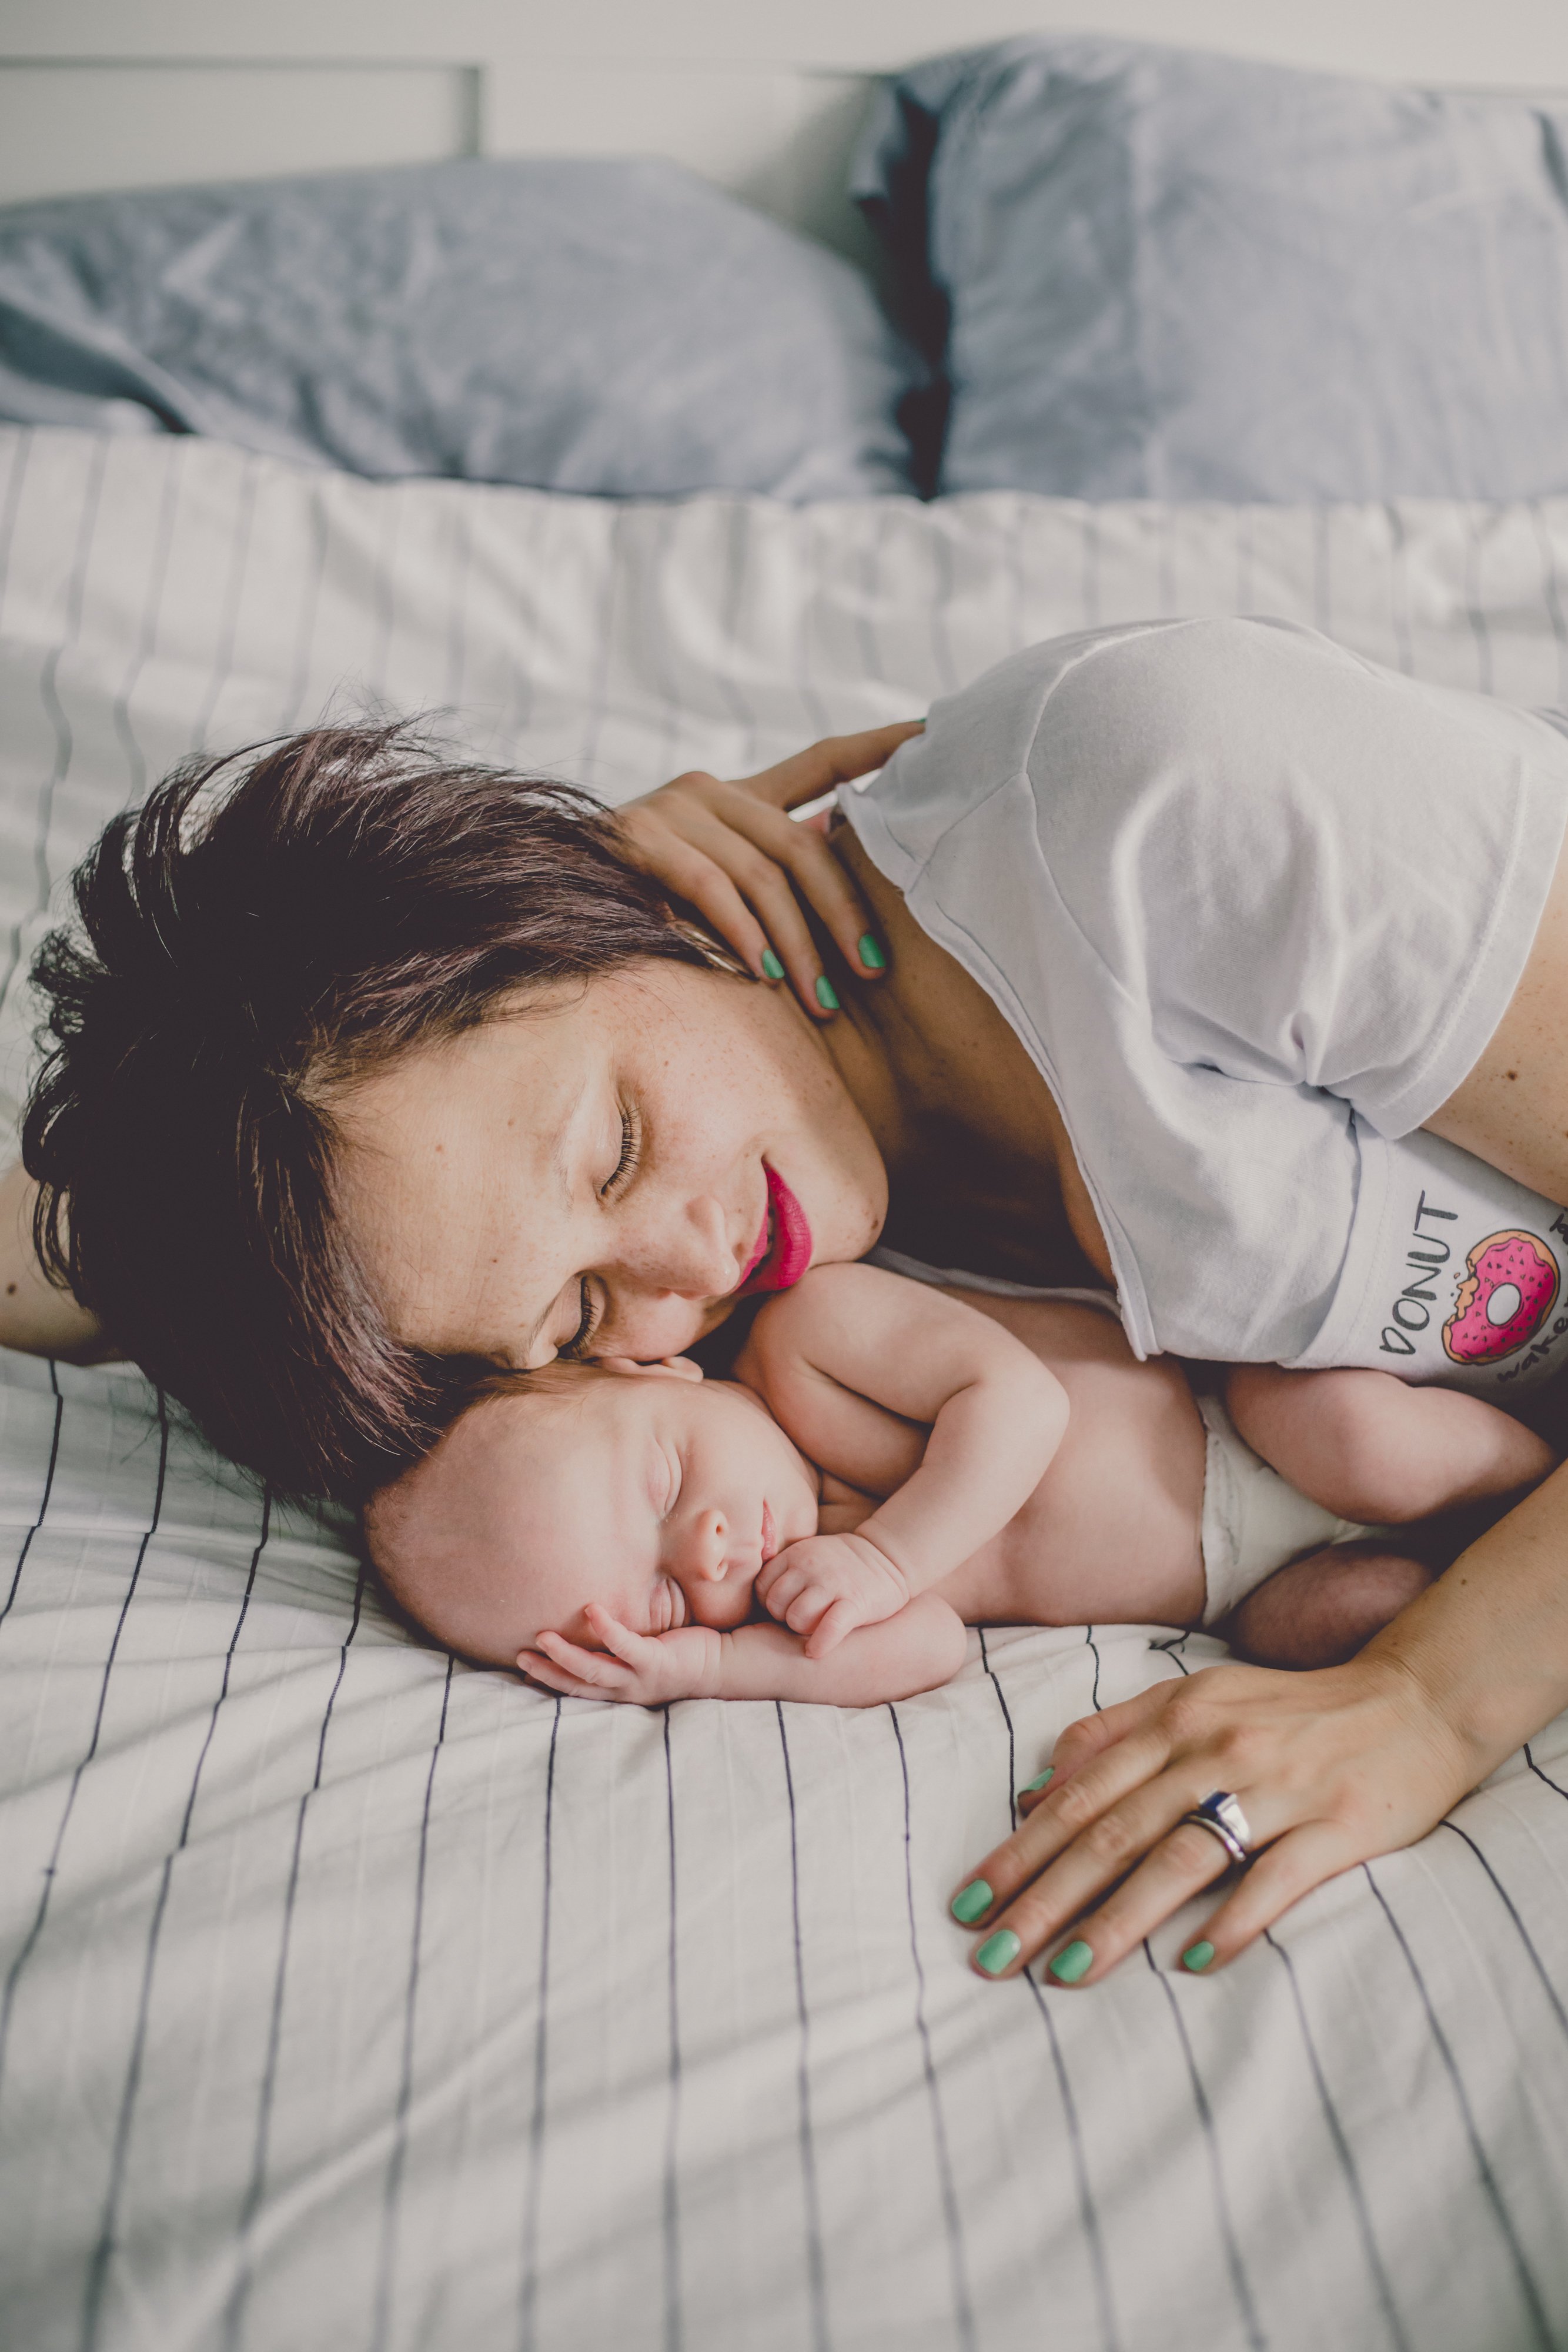 April Maciborka of Olive Studio in Canada photographs new mom Mandy as she snuggles one of her newborn twins. 